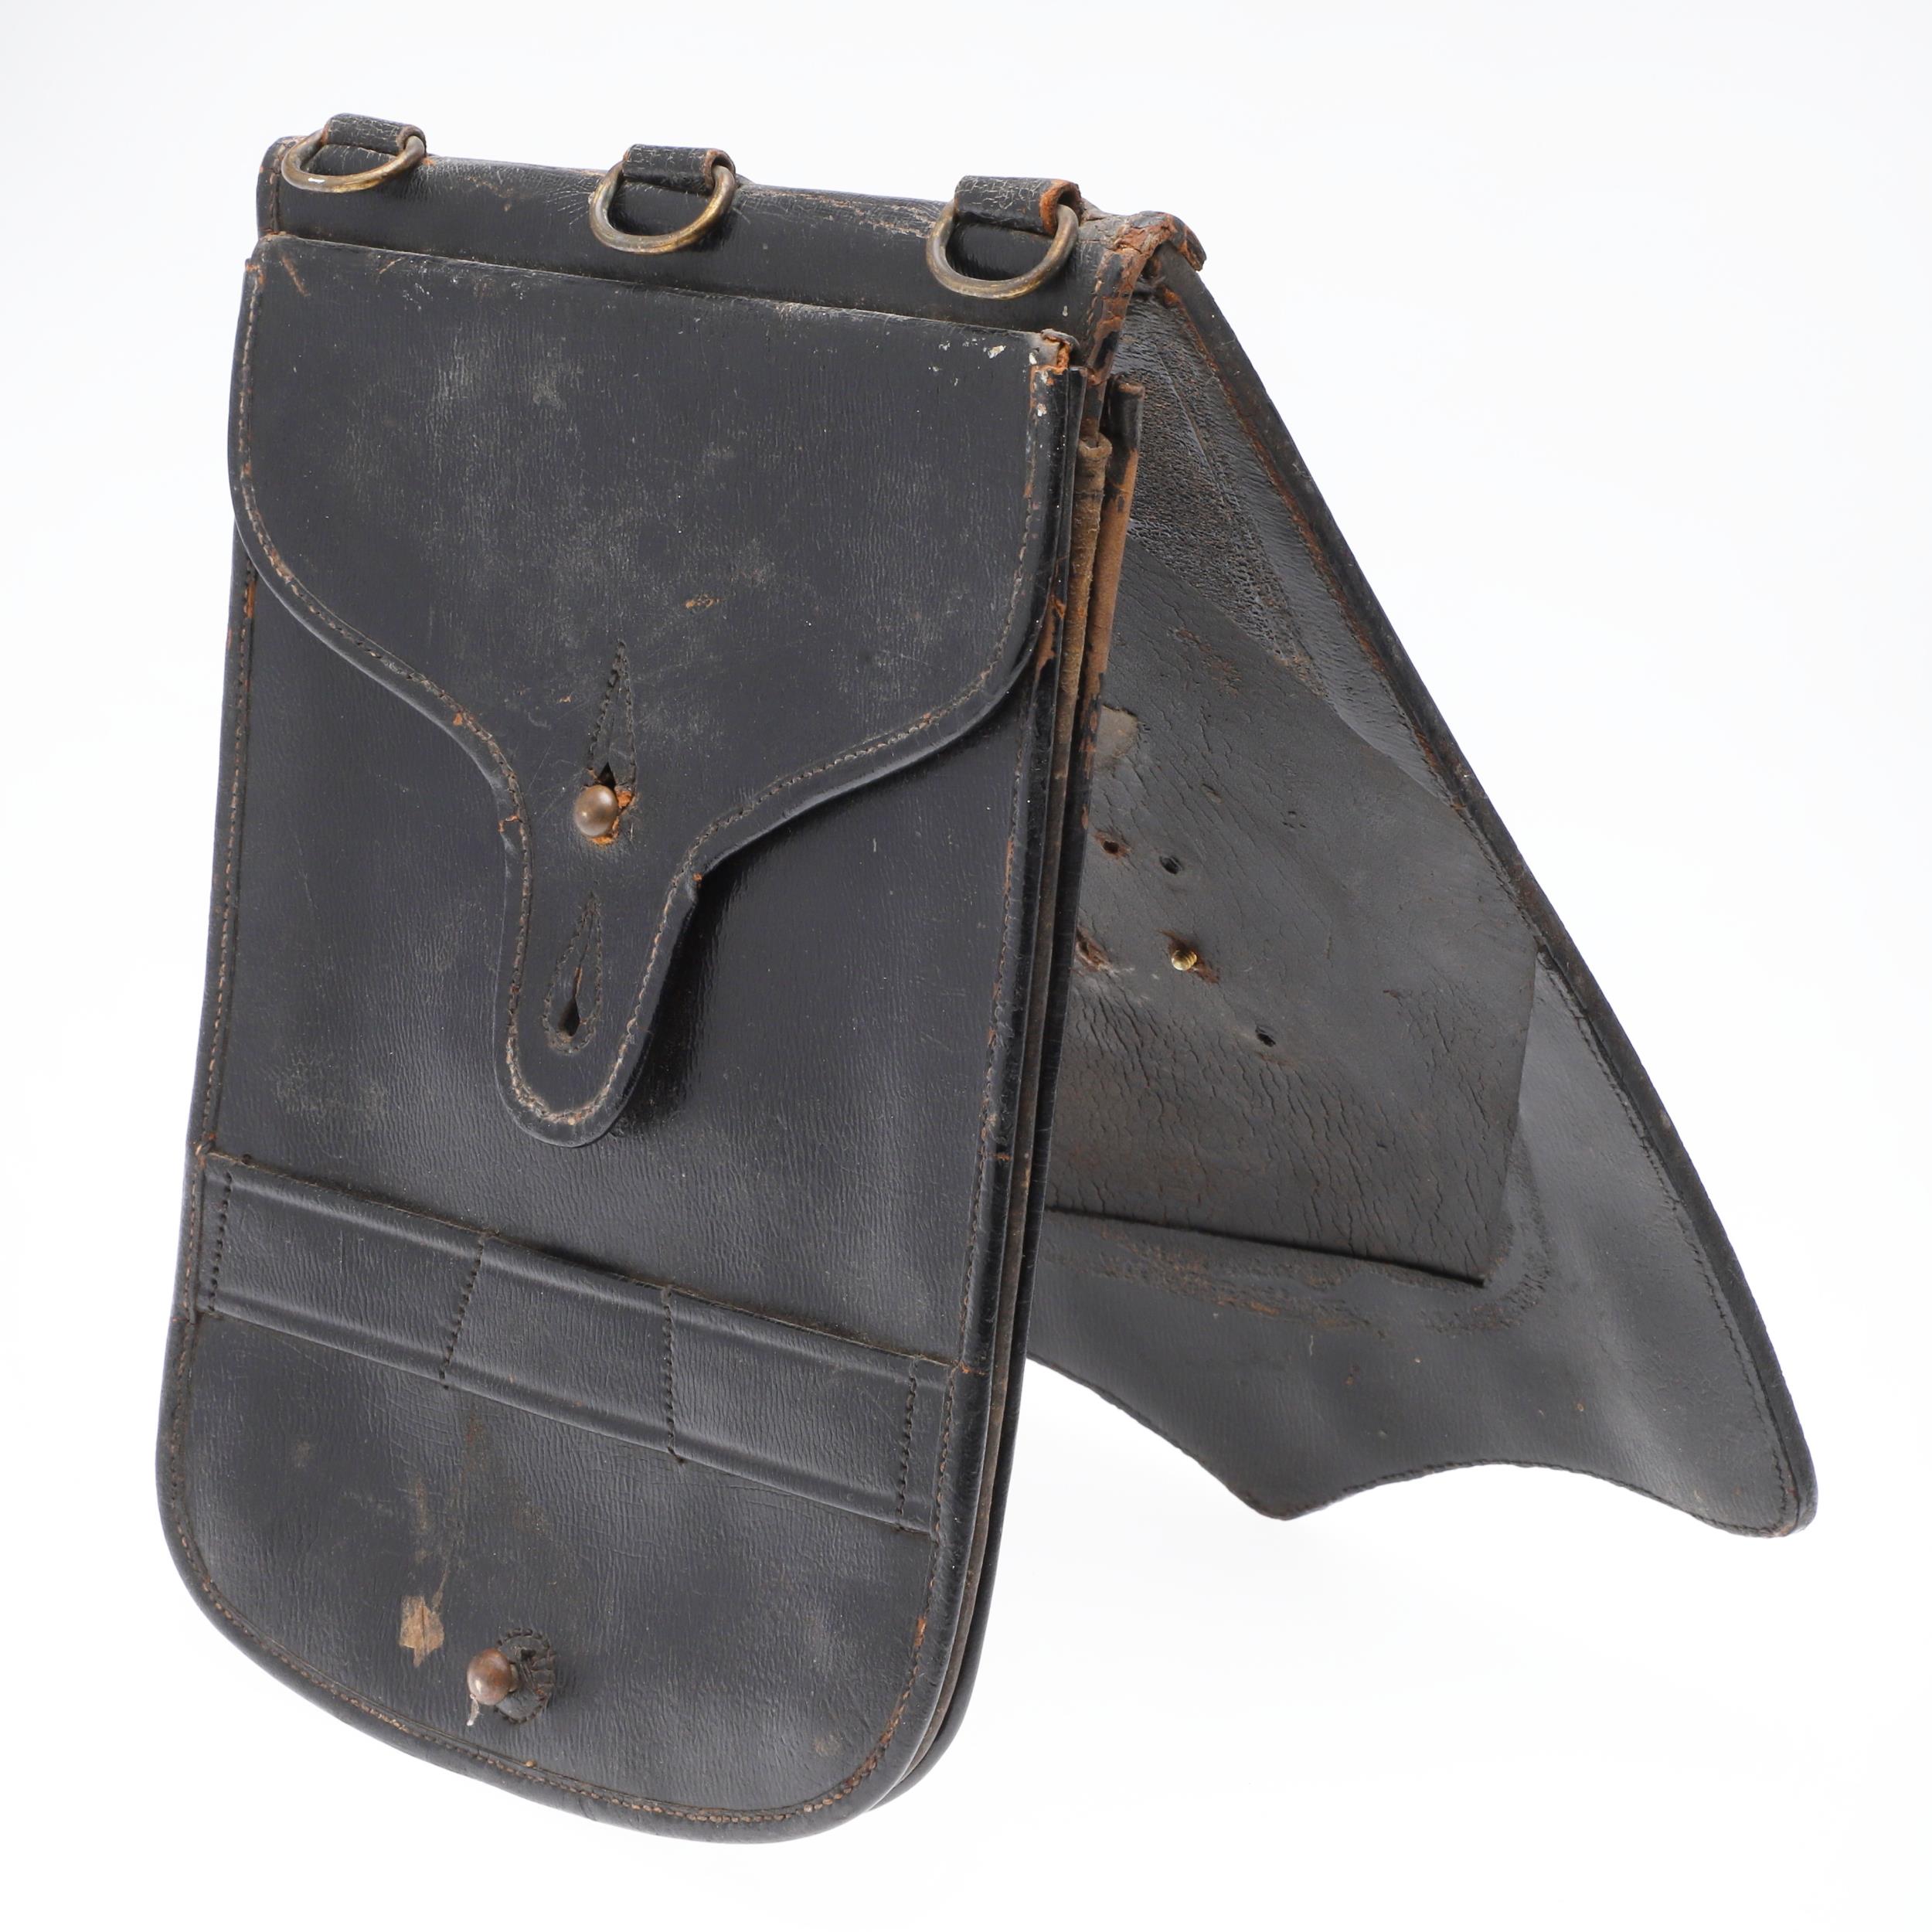 A VICTORIAN OFFICER'S UNDRESS BLACK LEATHER SABRETACHE. - Image 4 of 5